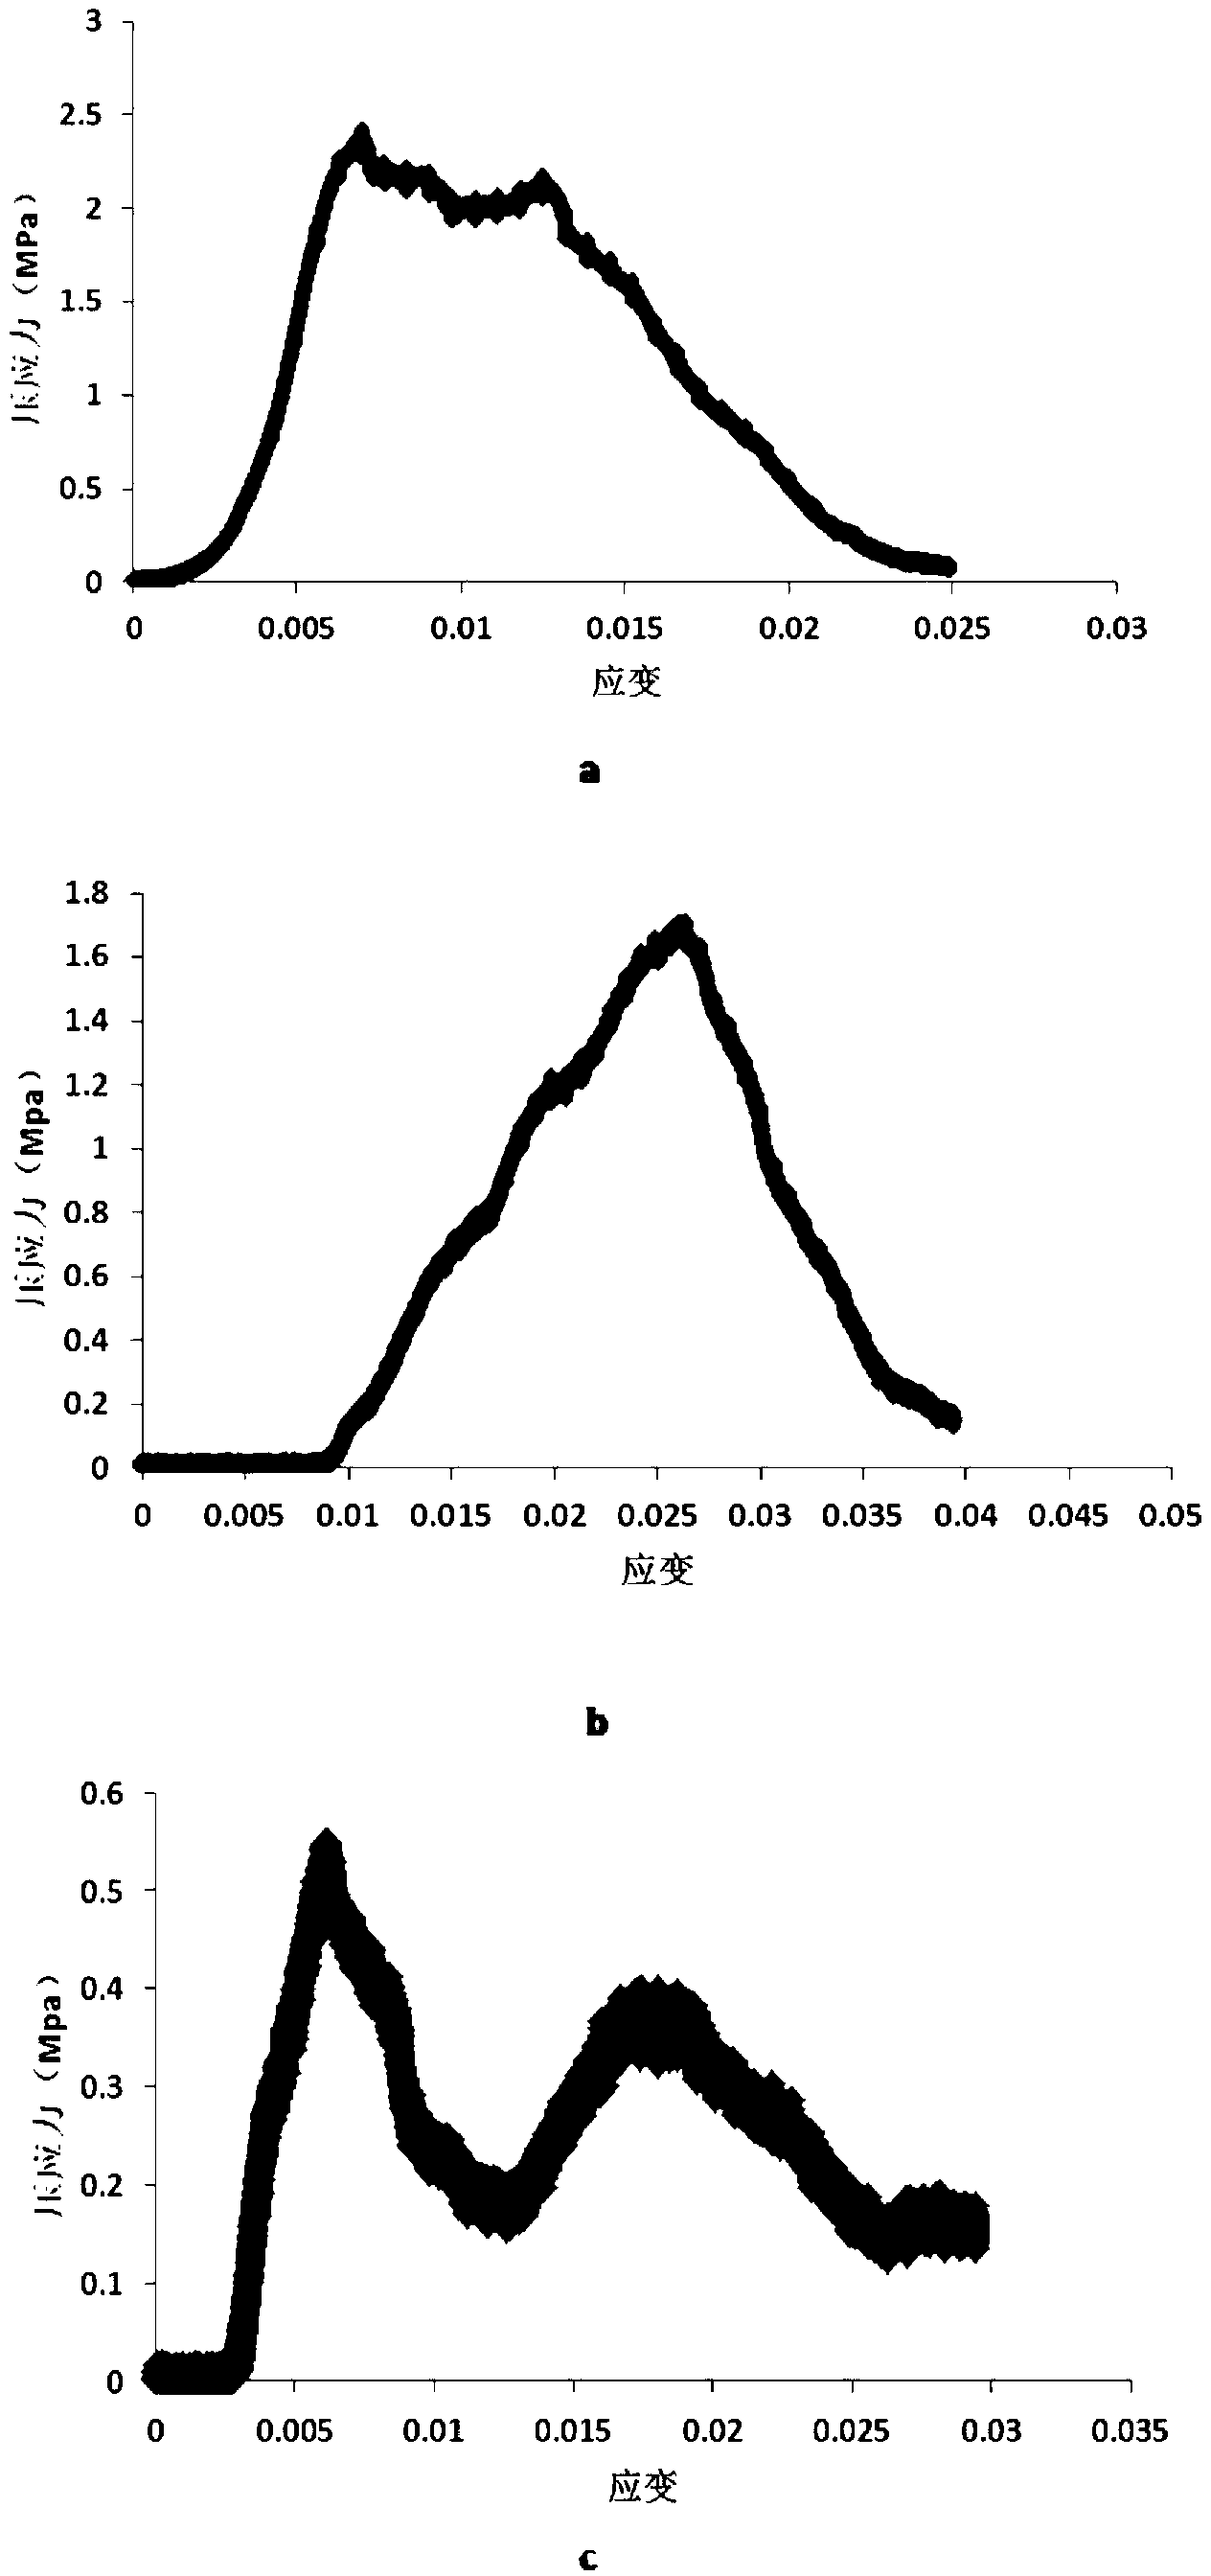 Bacillus lentus and method for generating by inducing bacillus lentus for reinforcing foundation